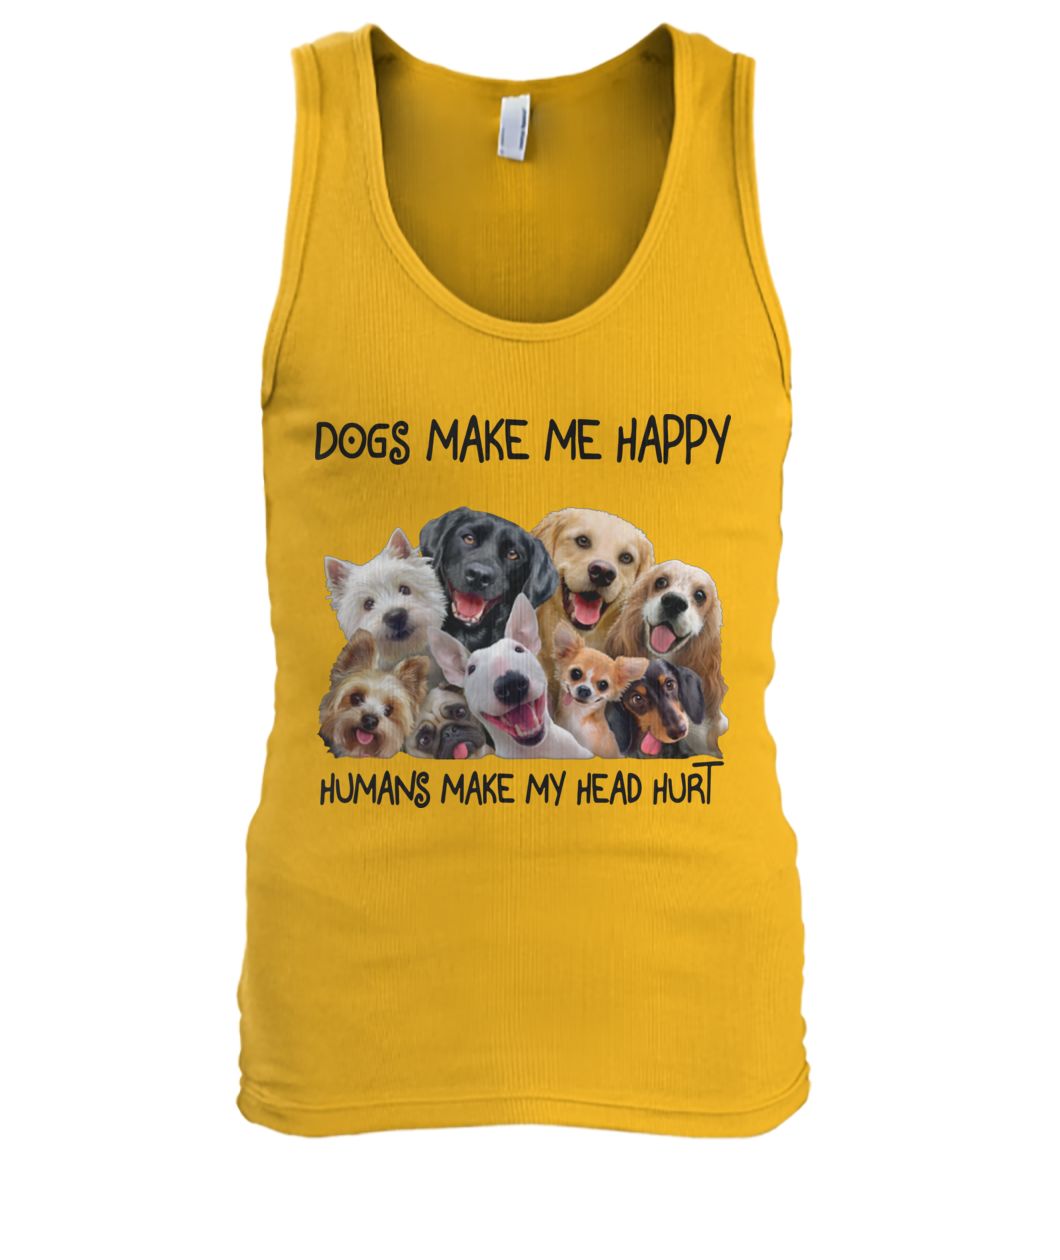 Dogs and tacos make me happy humans make my head hurt dog lover men's tank top